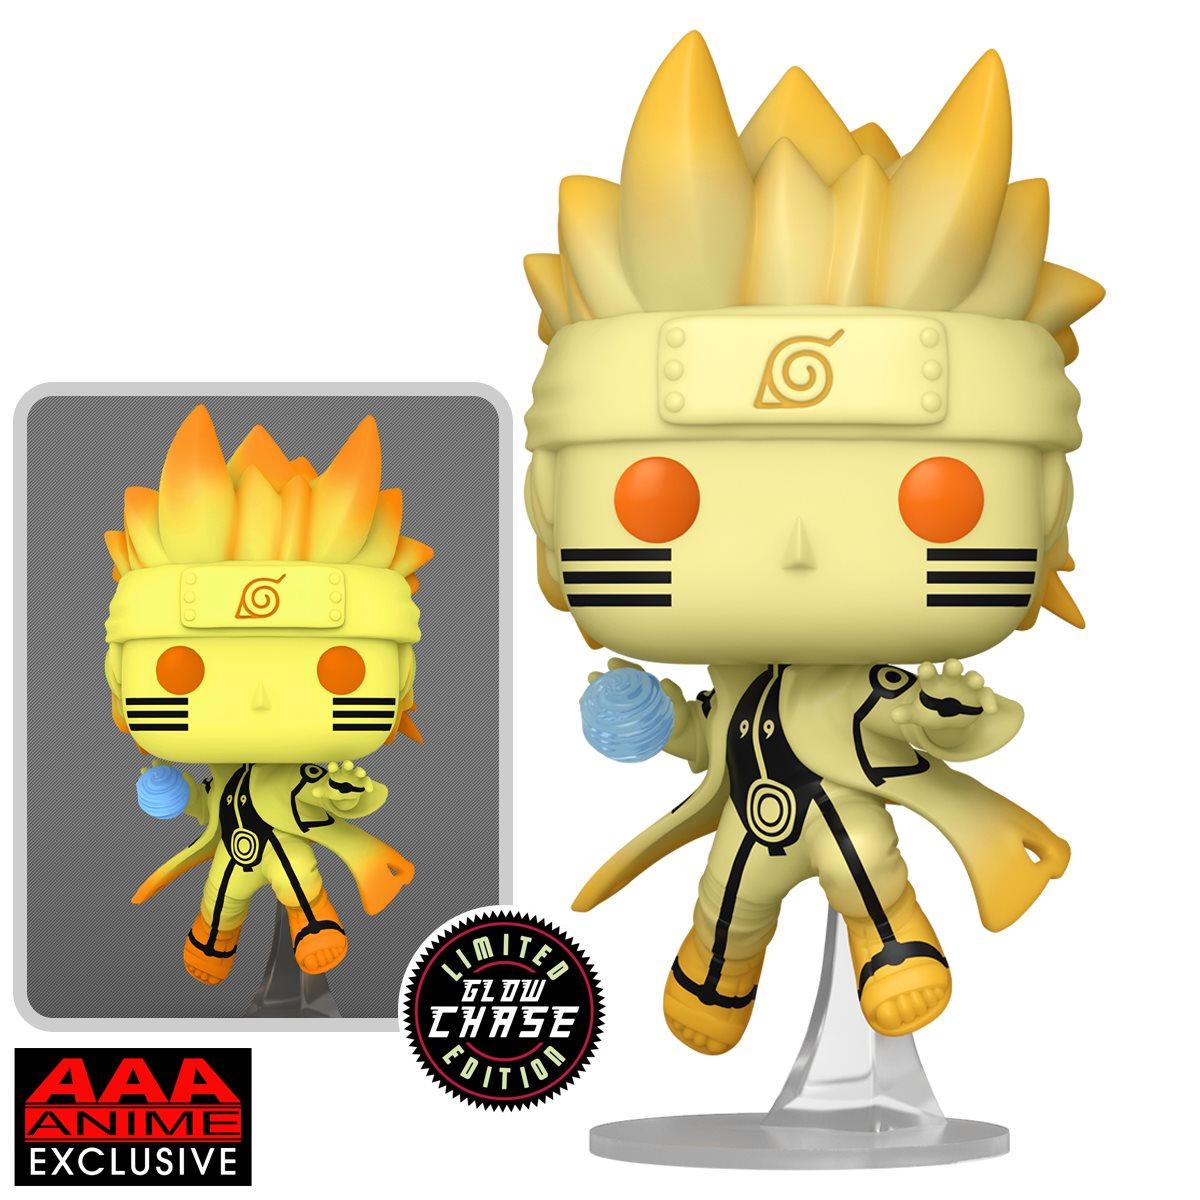 vægt krænkelse Rundt om Naruto Kurama Link Mode Funko Pop With Chase AAA Anime Exclusive Is On Sale  Now